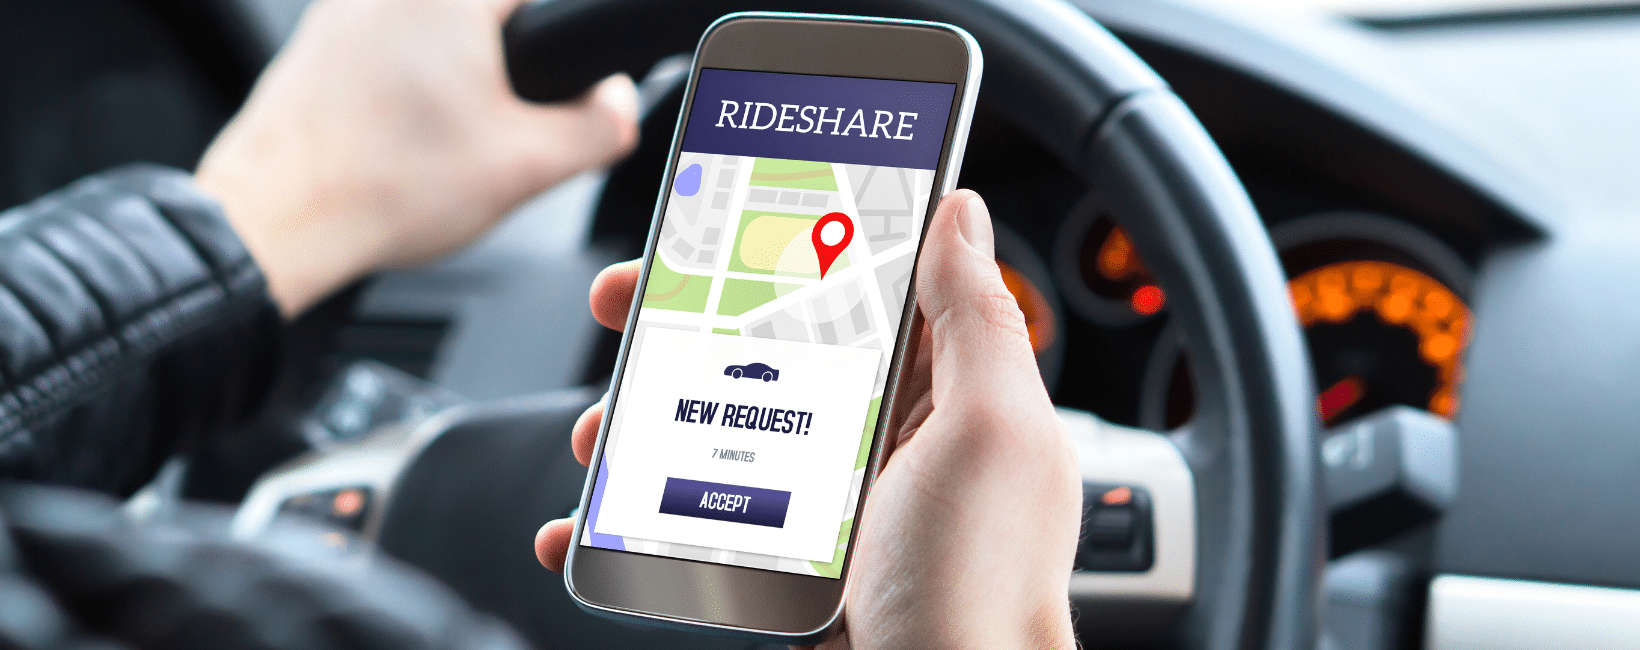 mobile phone rideshare request from car